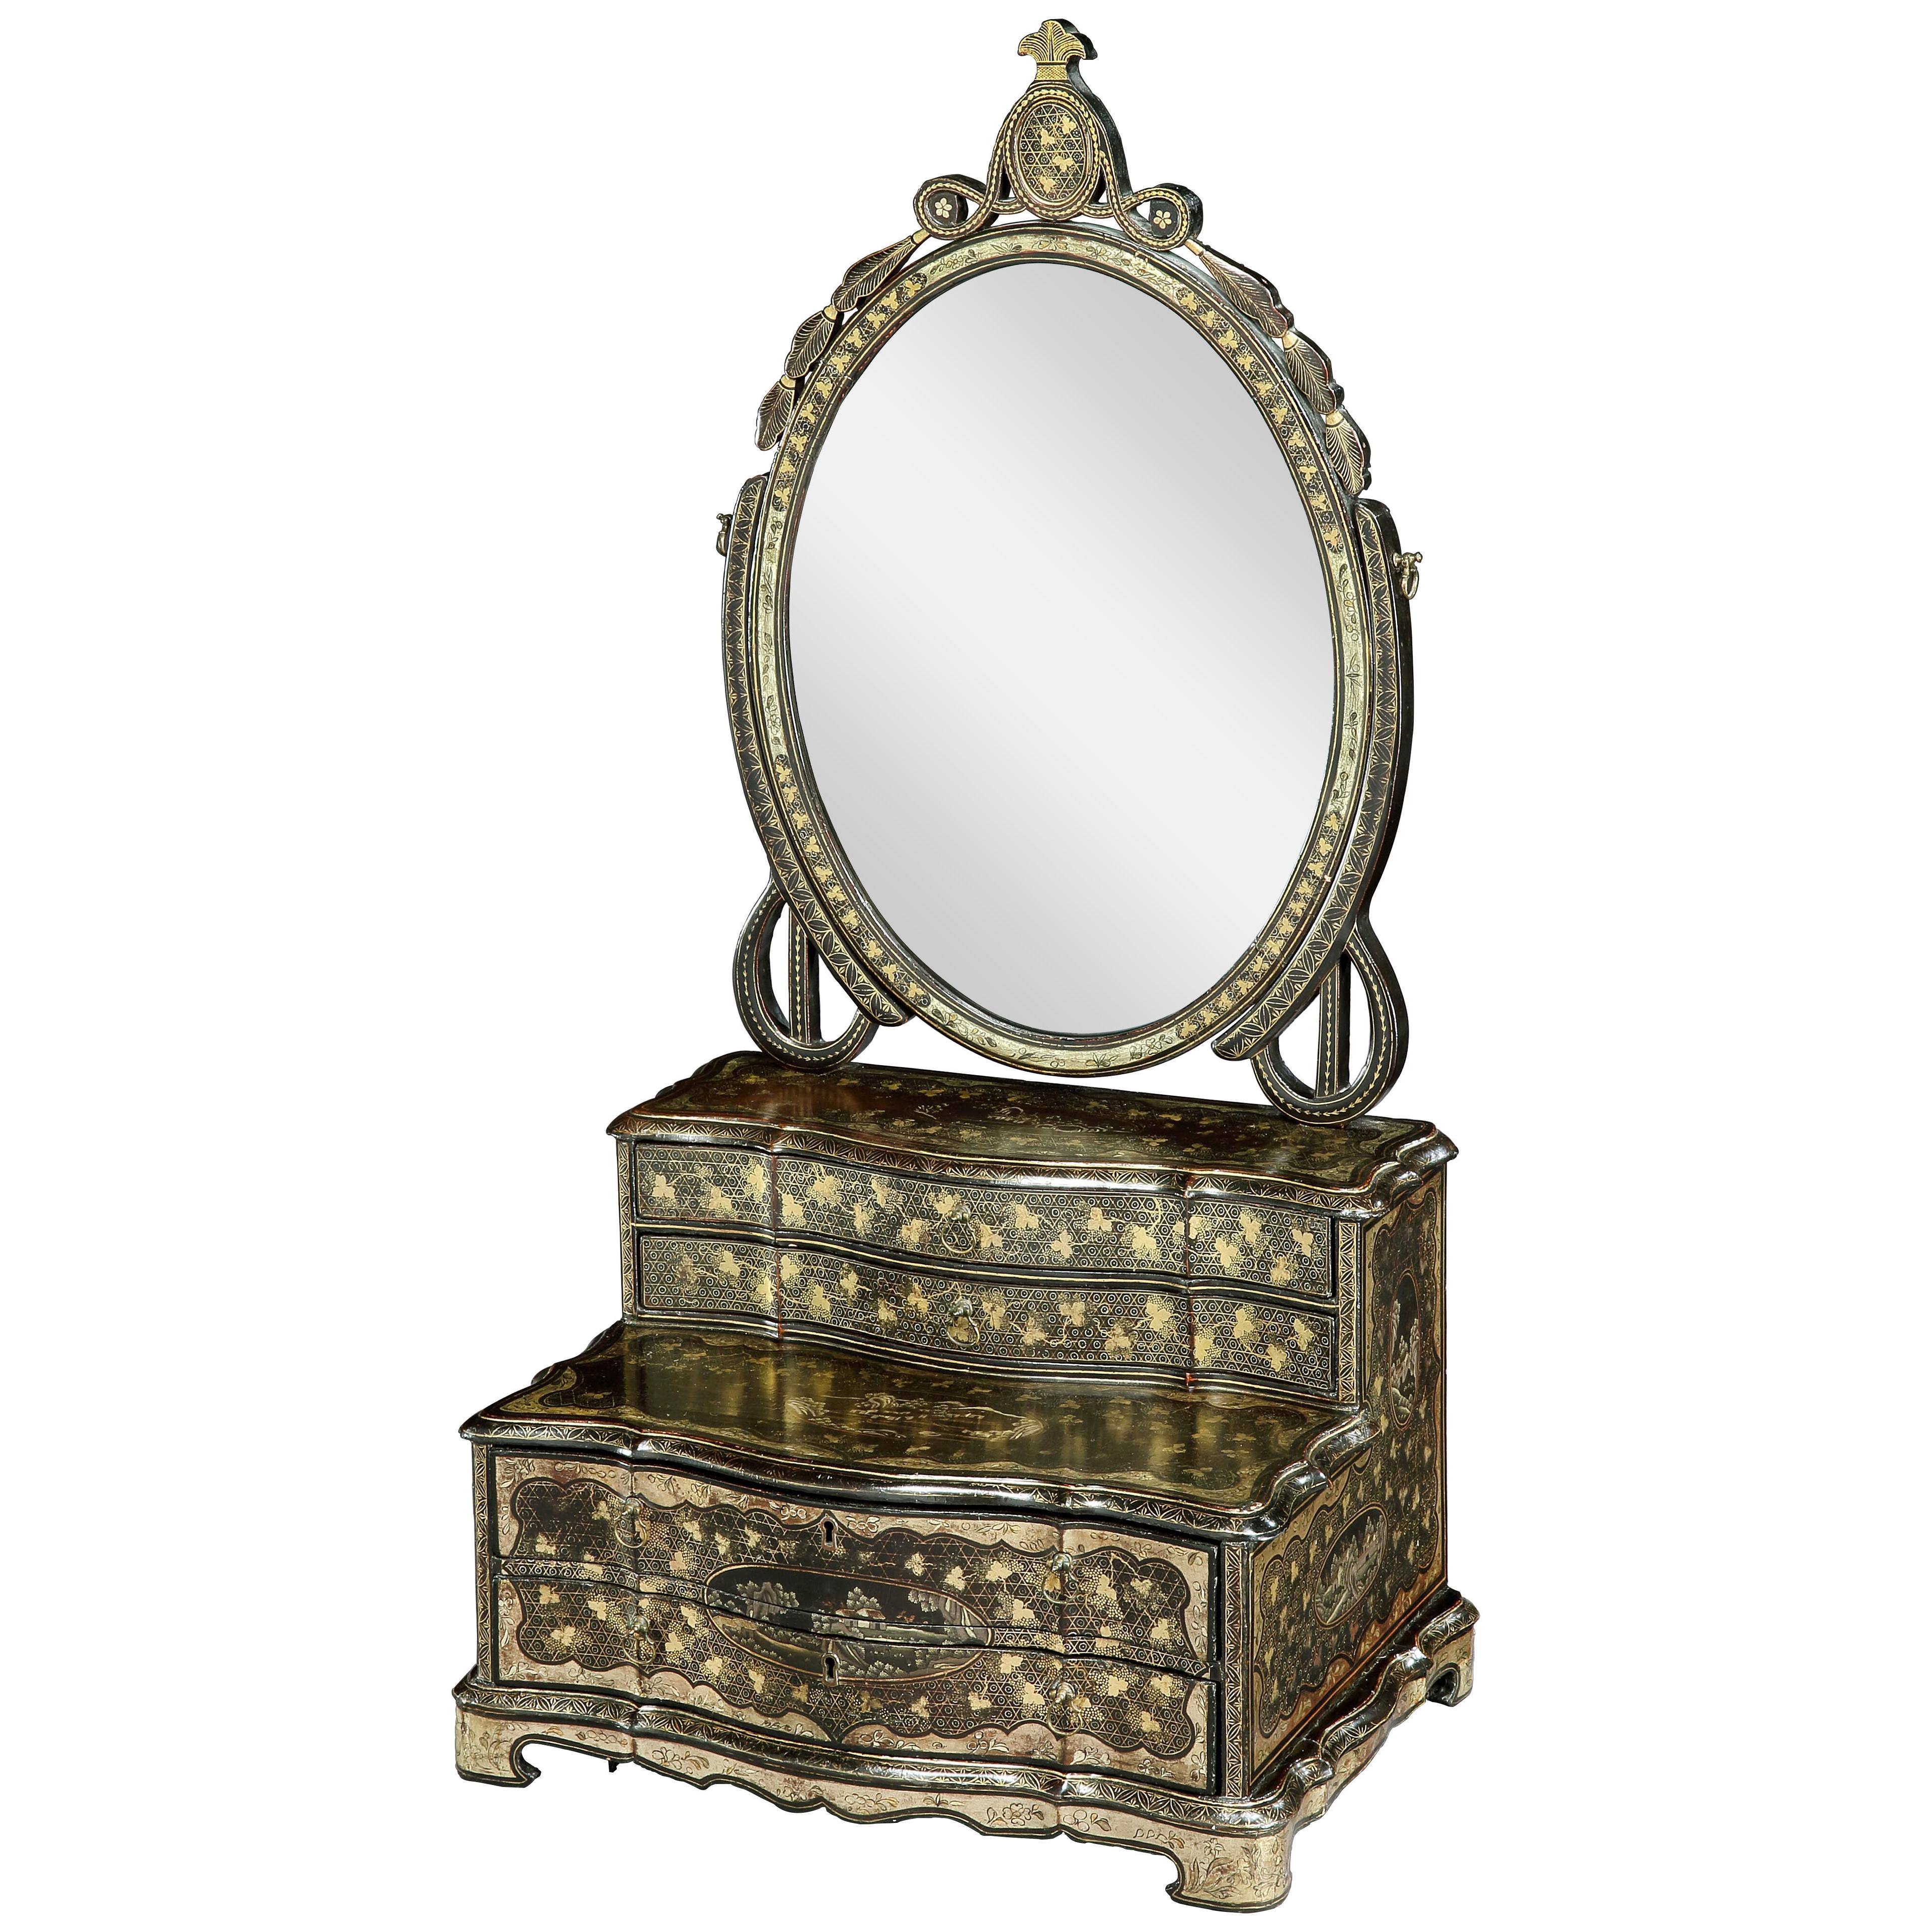 A Chinese export lacquer dressing mirror